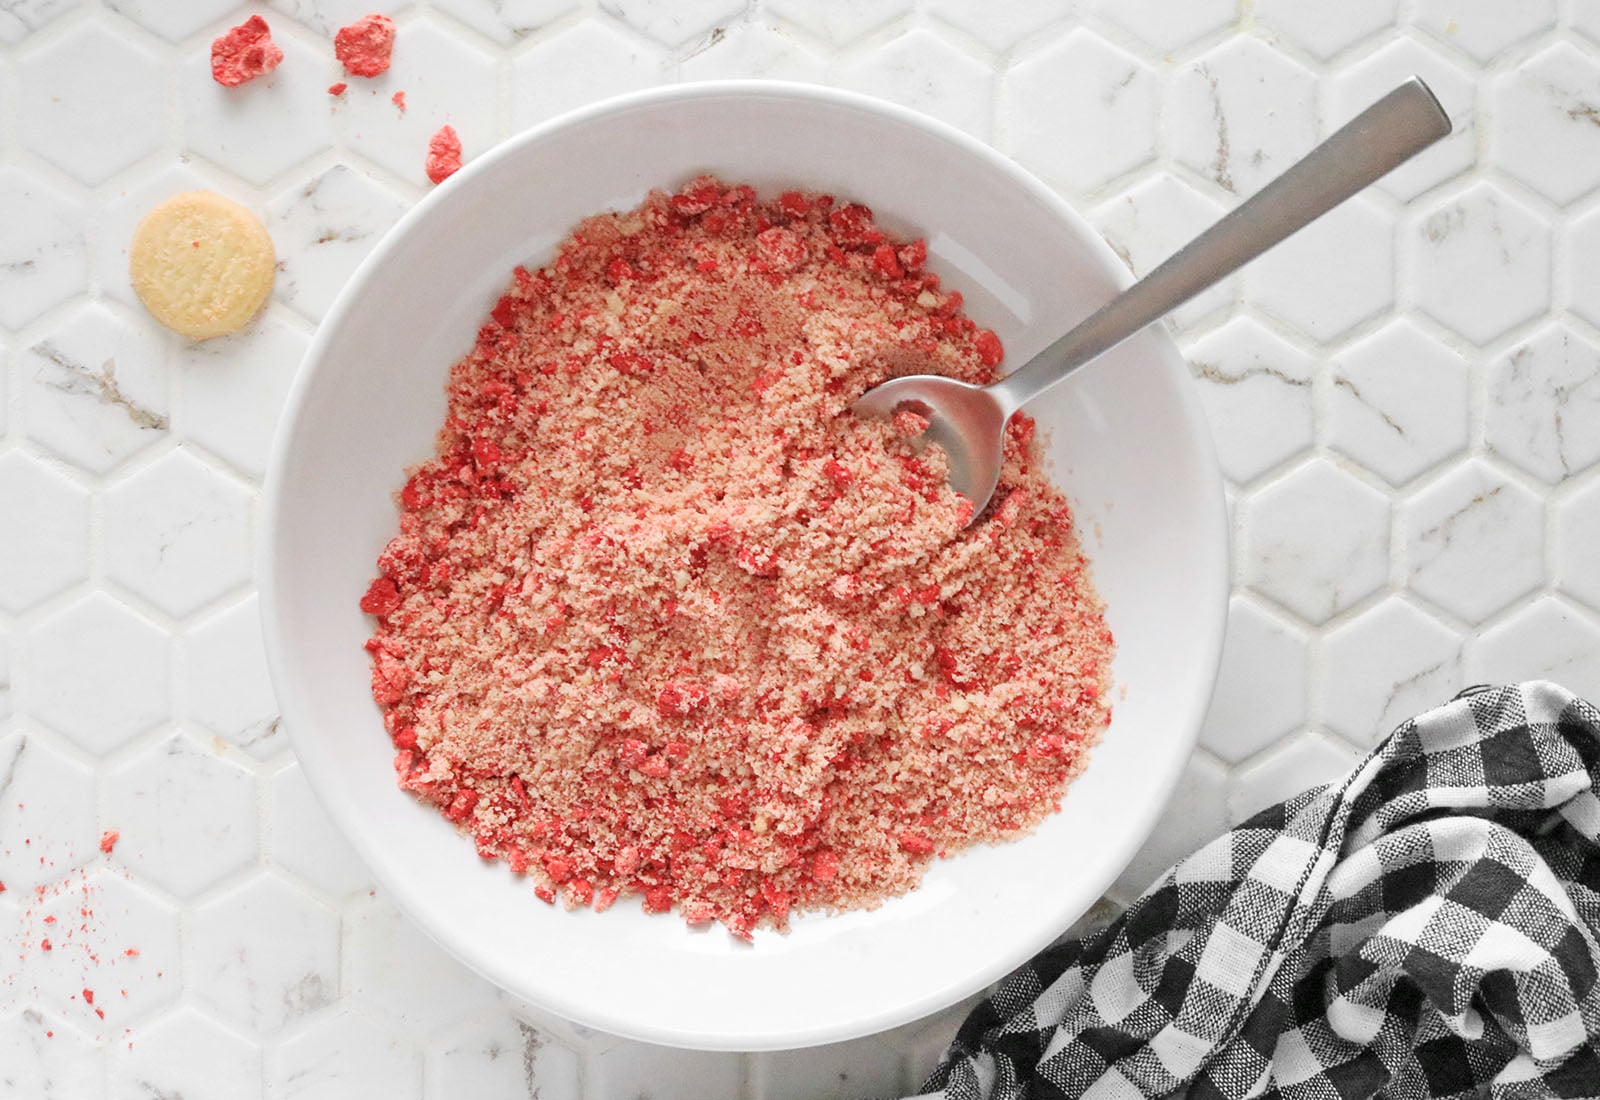 Combine shortbread crumbs and dried strawberries